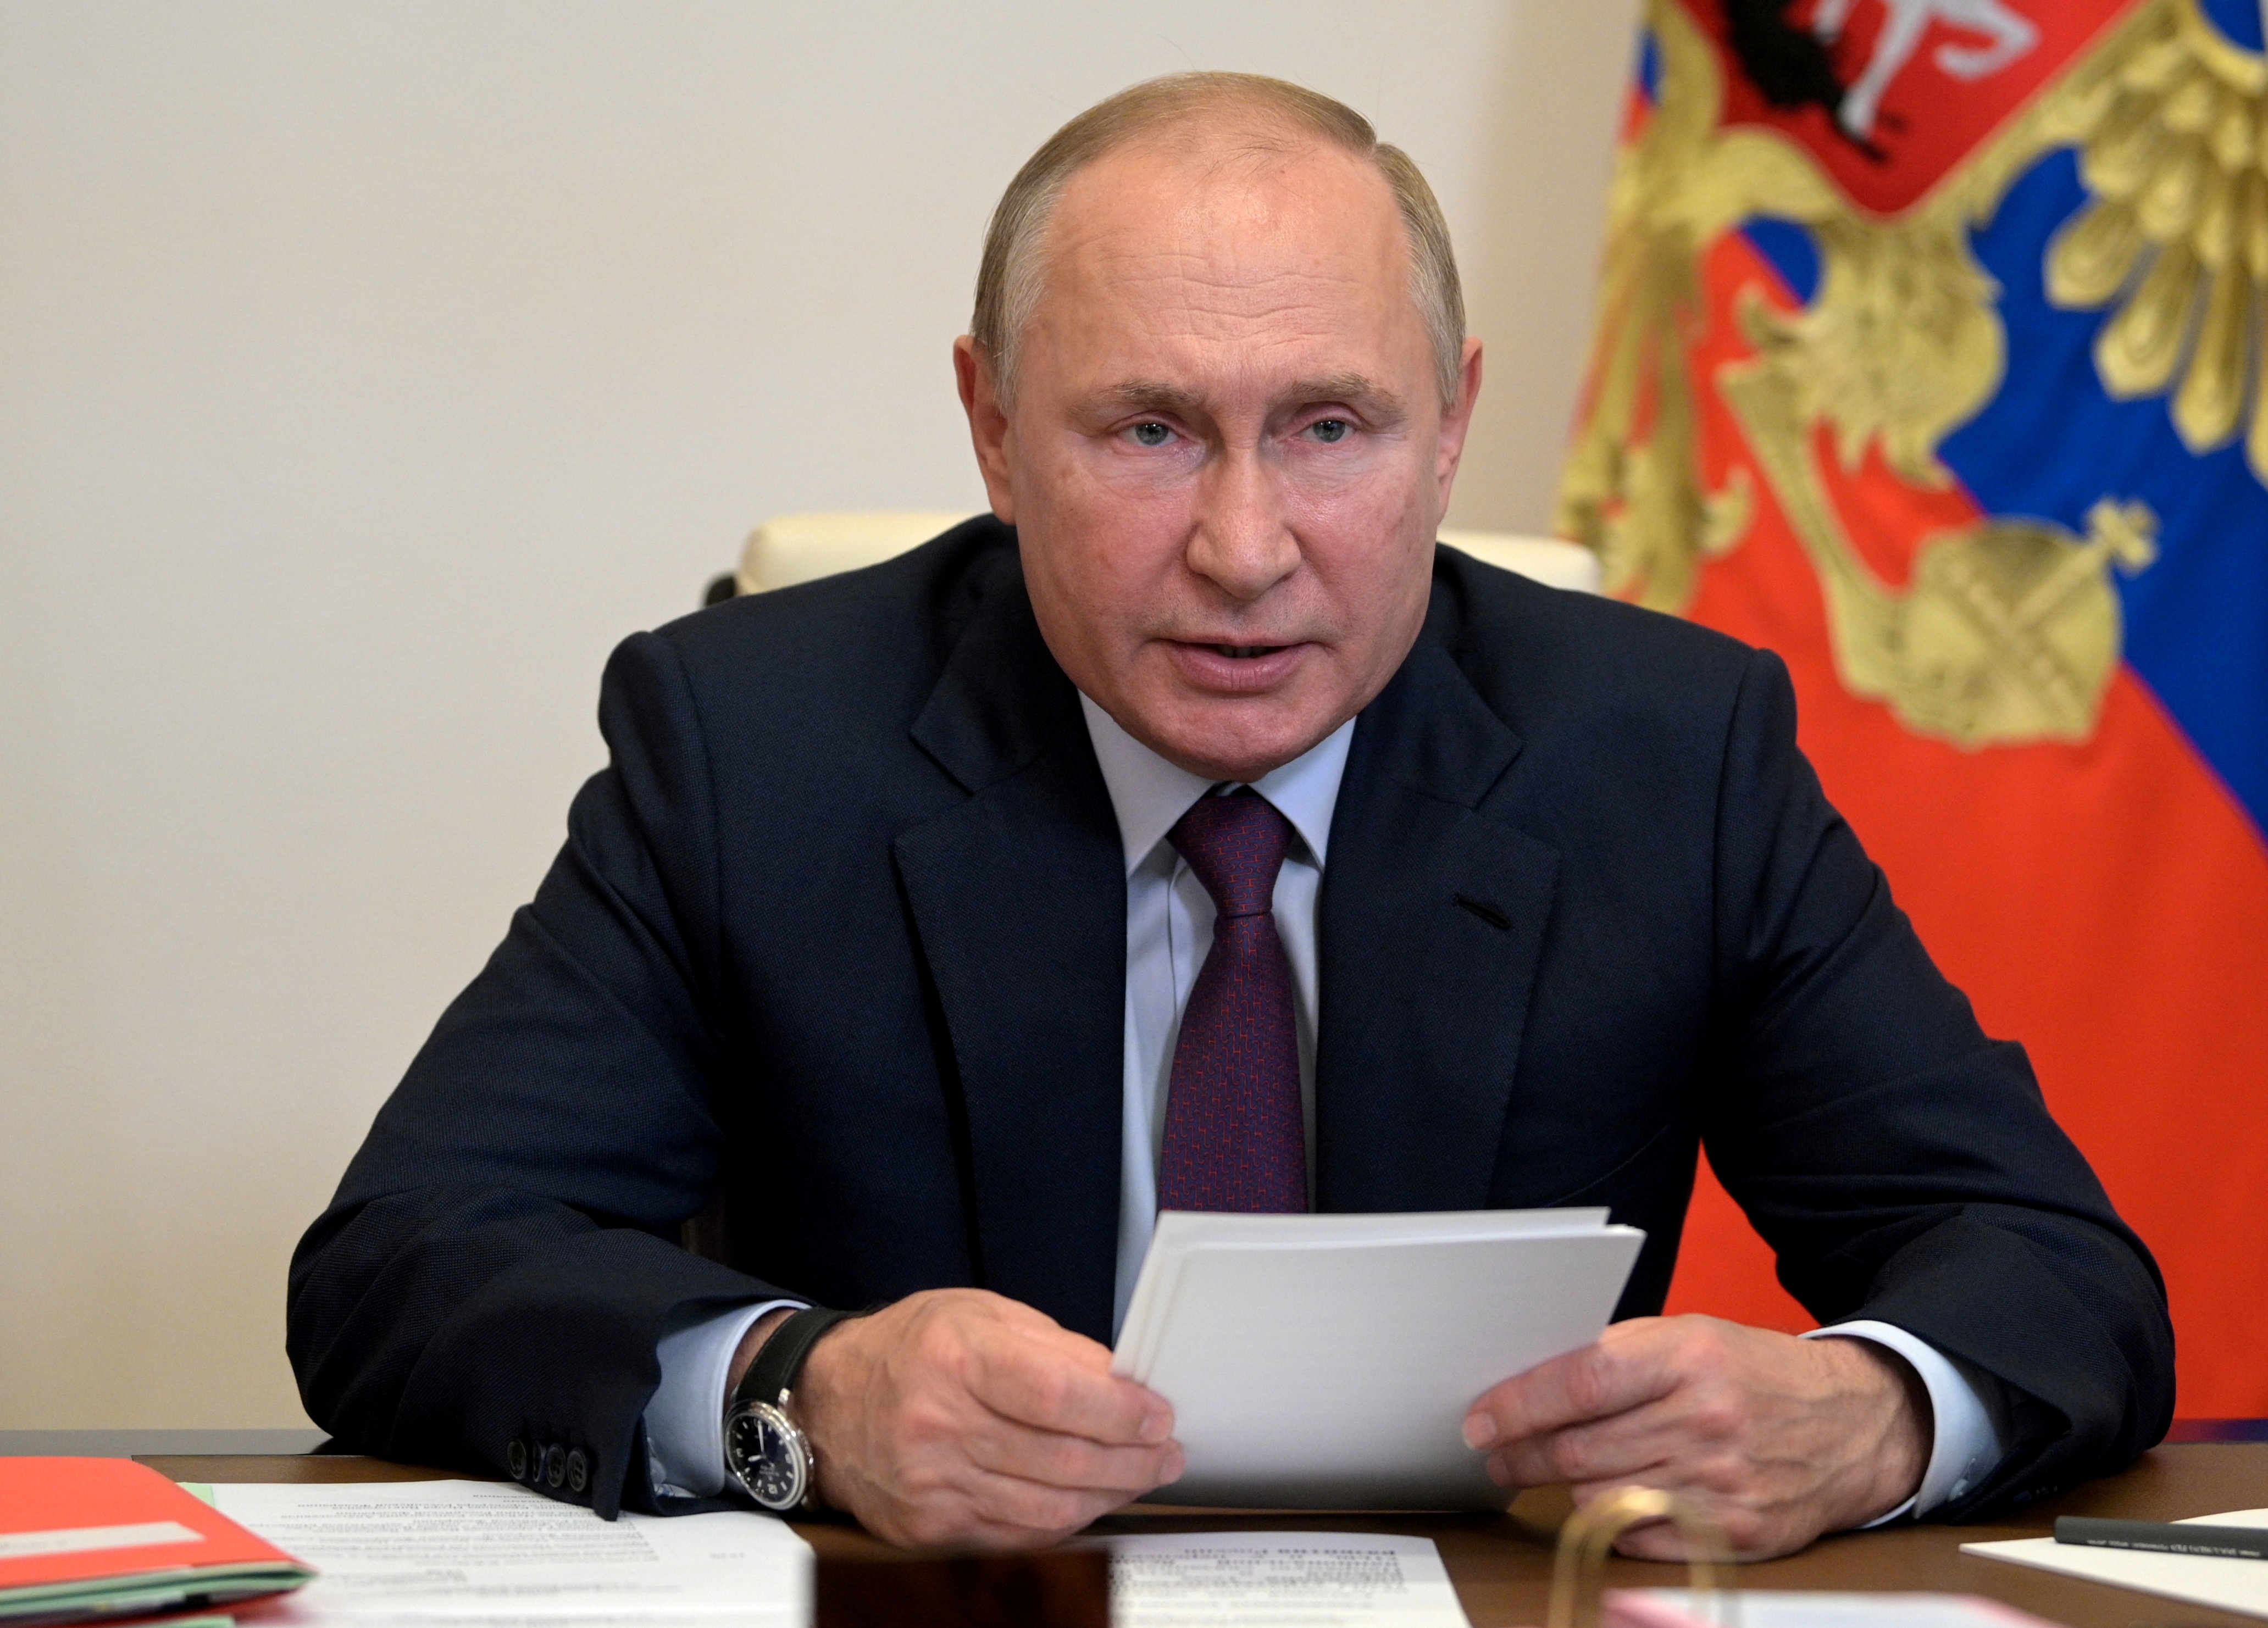 Russian President Putin chairs a meeting with members of the Security Council via a video link outside Moscow